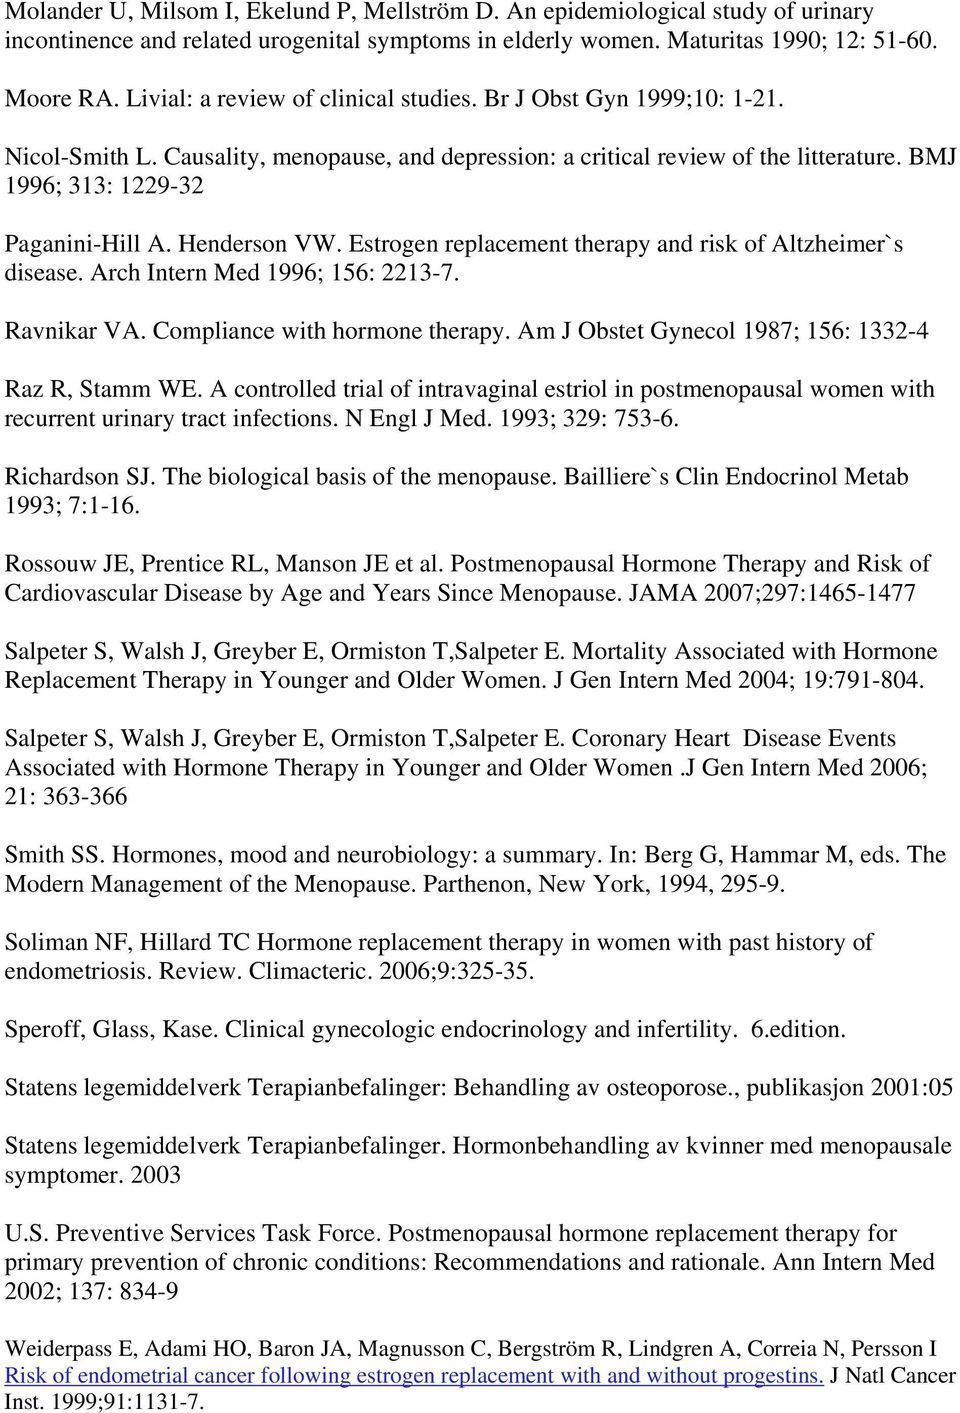 Henderson VW. Estrogen replacement therapy and risk of Altzheimer`s disease. Arch Intern Med 1996; 156: 2213-7. Ravnikar VA. Compliance with hormone therapy.